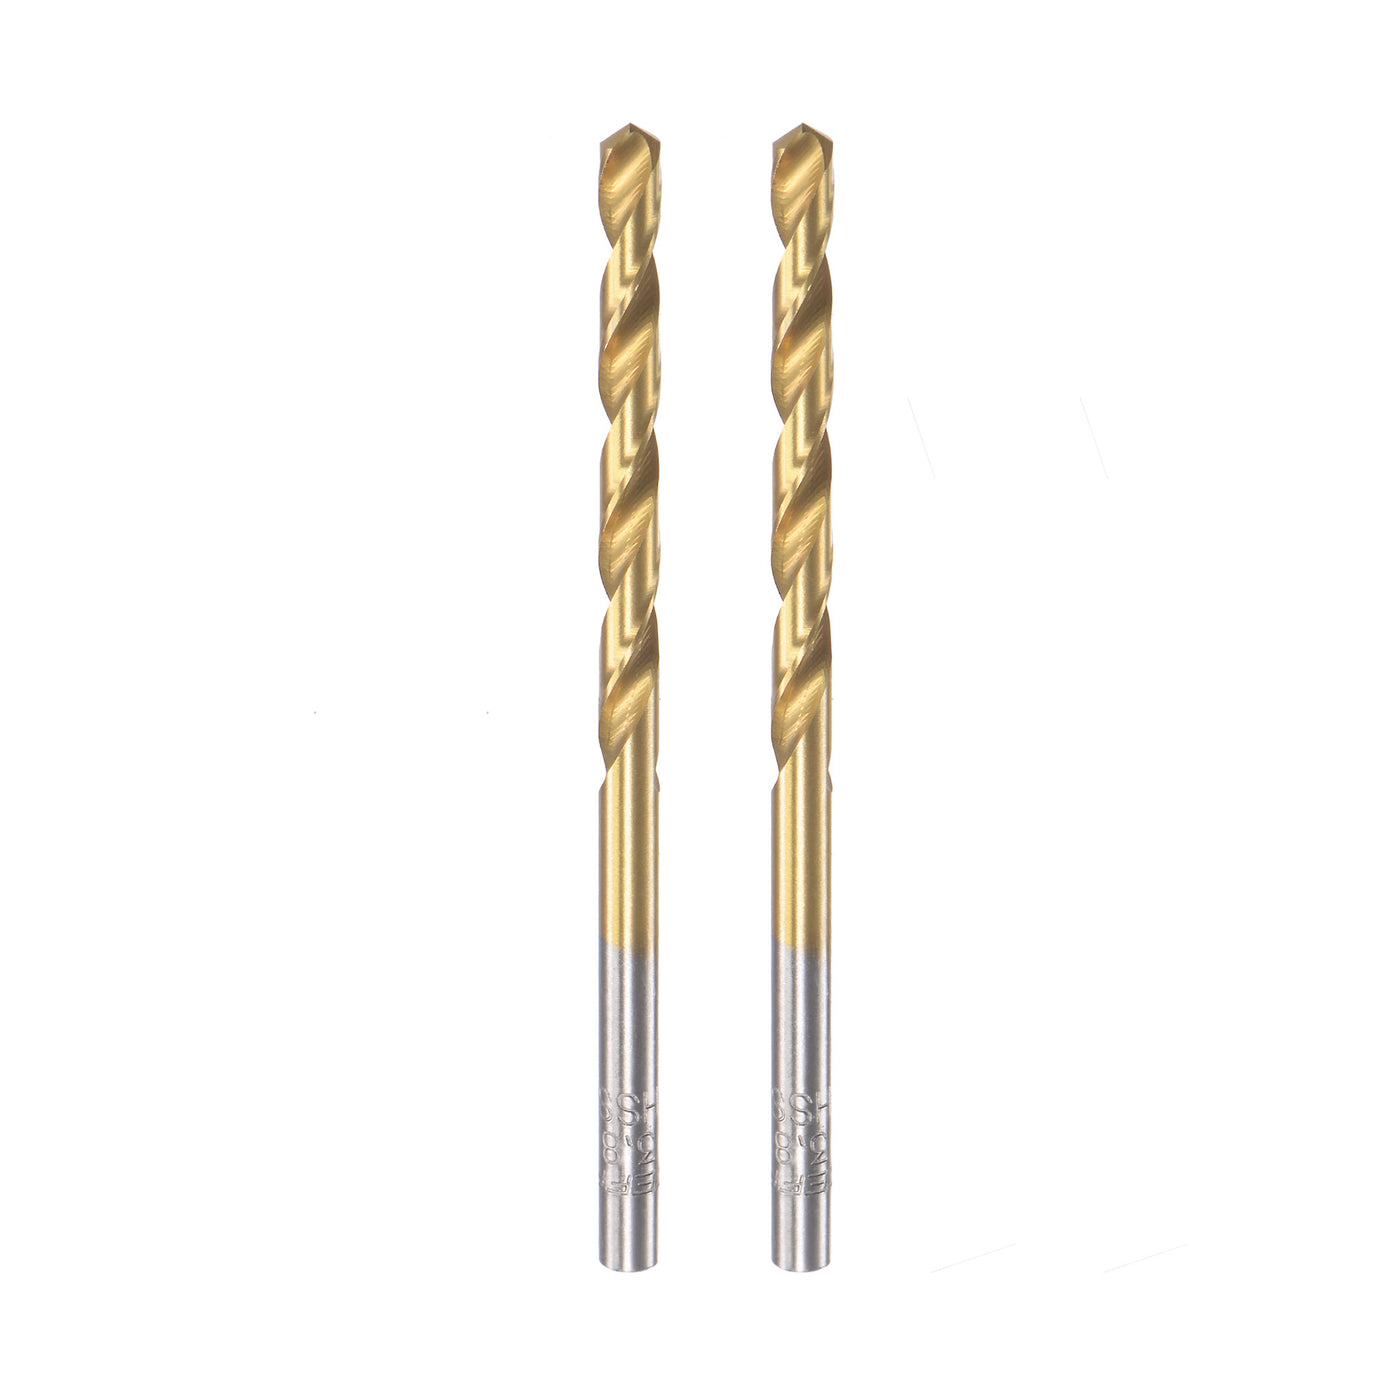 uxcell Uxcell High Speed Steel Twist Drill Bit 3.8mm Fully Ground Titanium Coated 2 Pcs